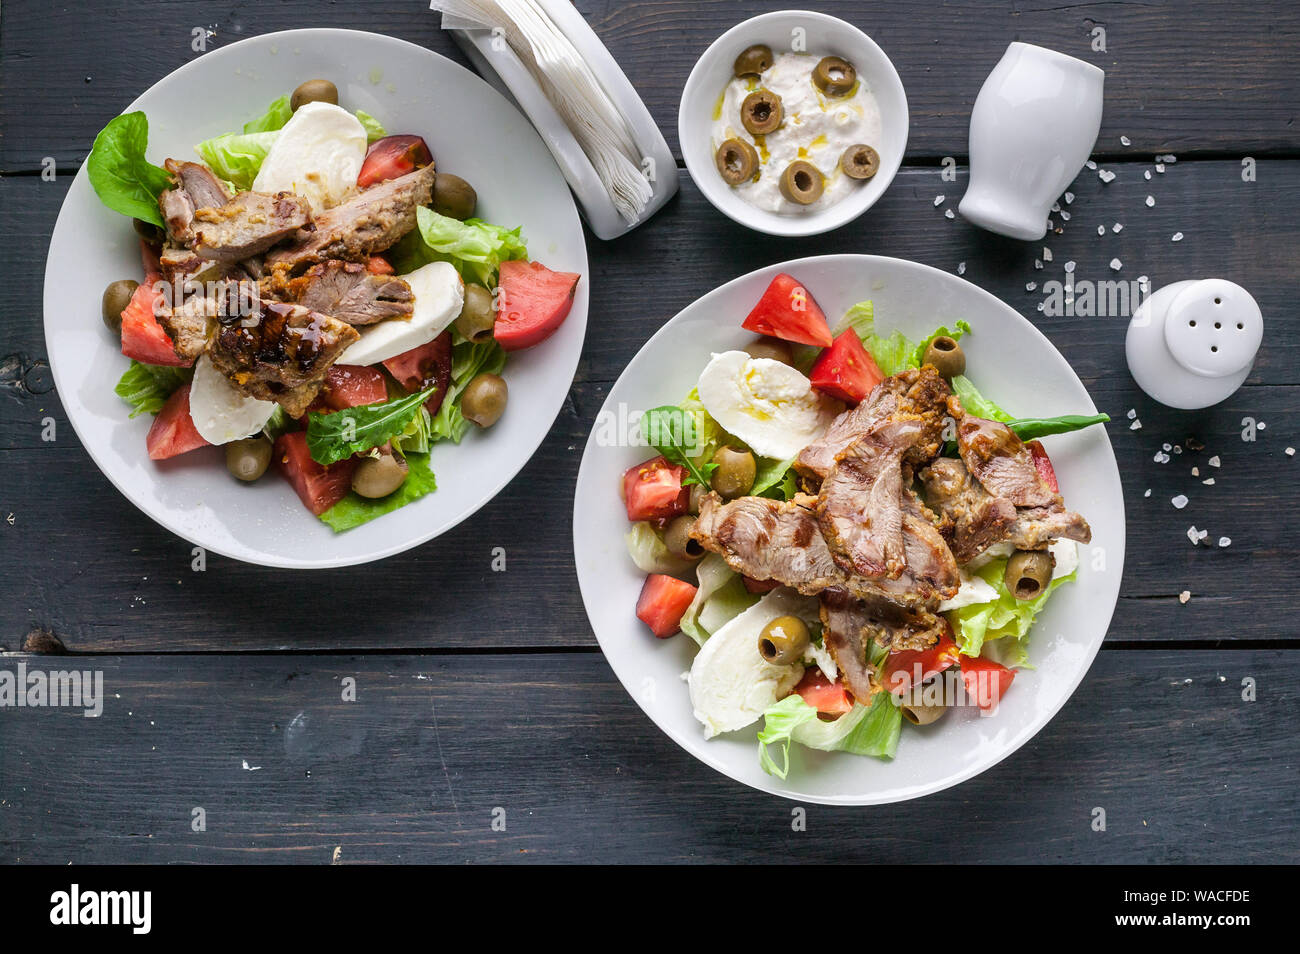 Two servings of grilled meat and salad with vegetables, mozzarella and herbs. Traditional Mediterranean Cuisine Stock Photo